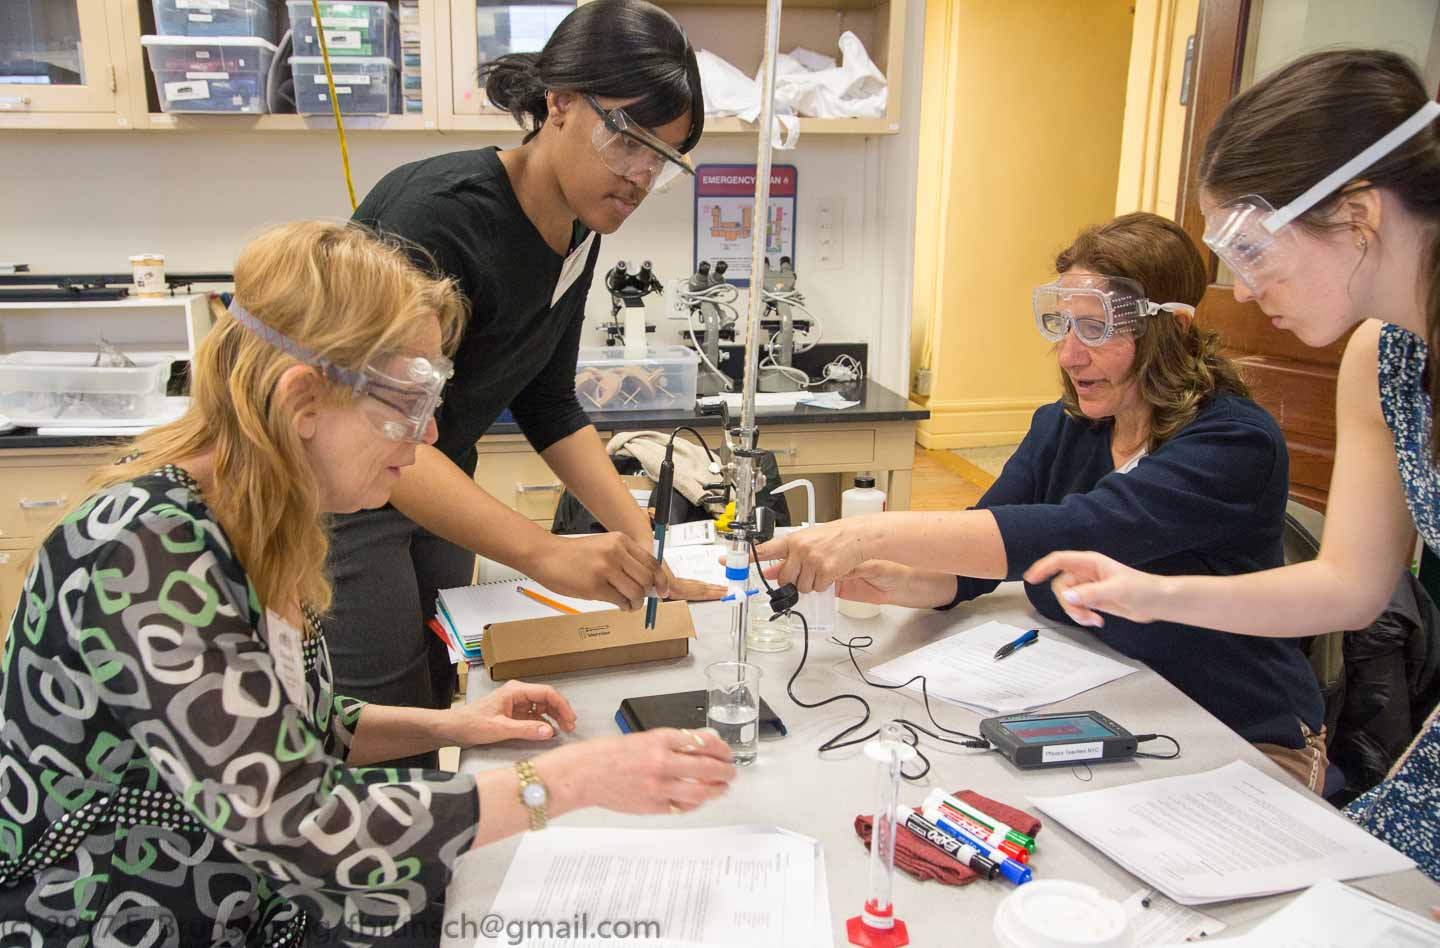 From Atoms to Ions: Cultivating Evidence-Based Thinking in the STEM Classroom